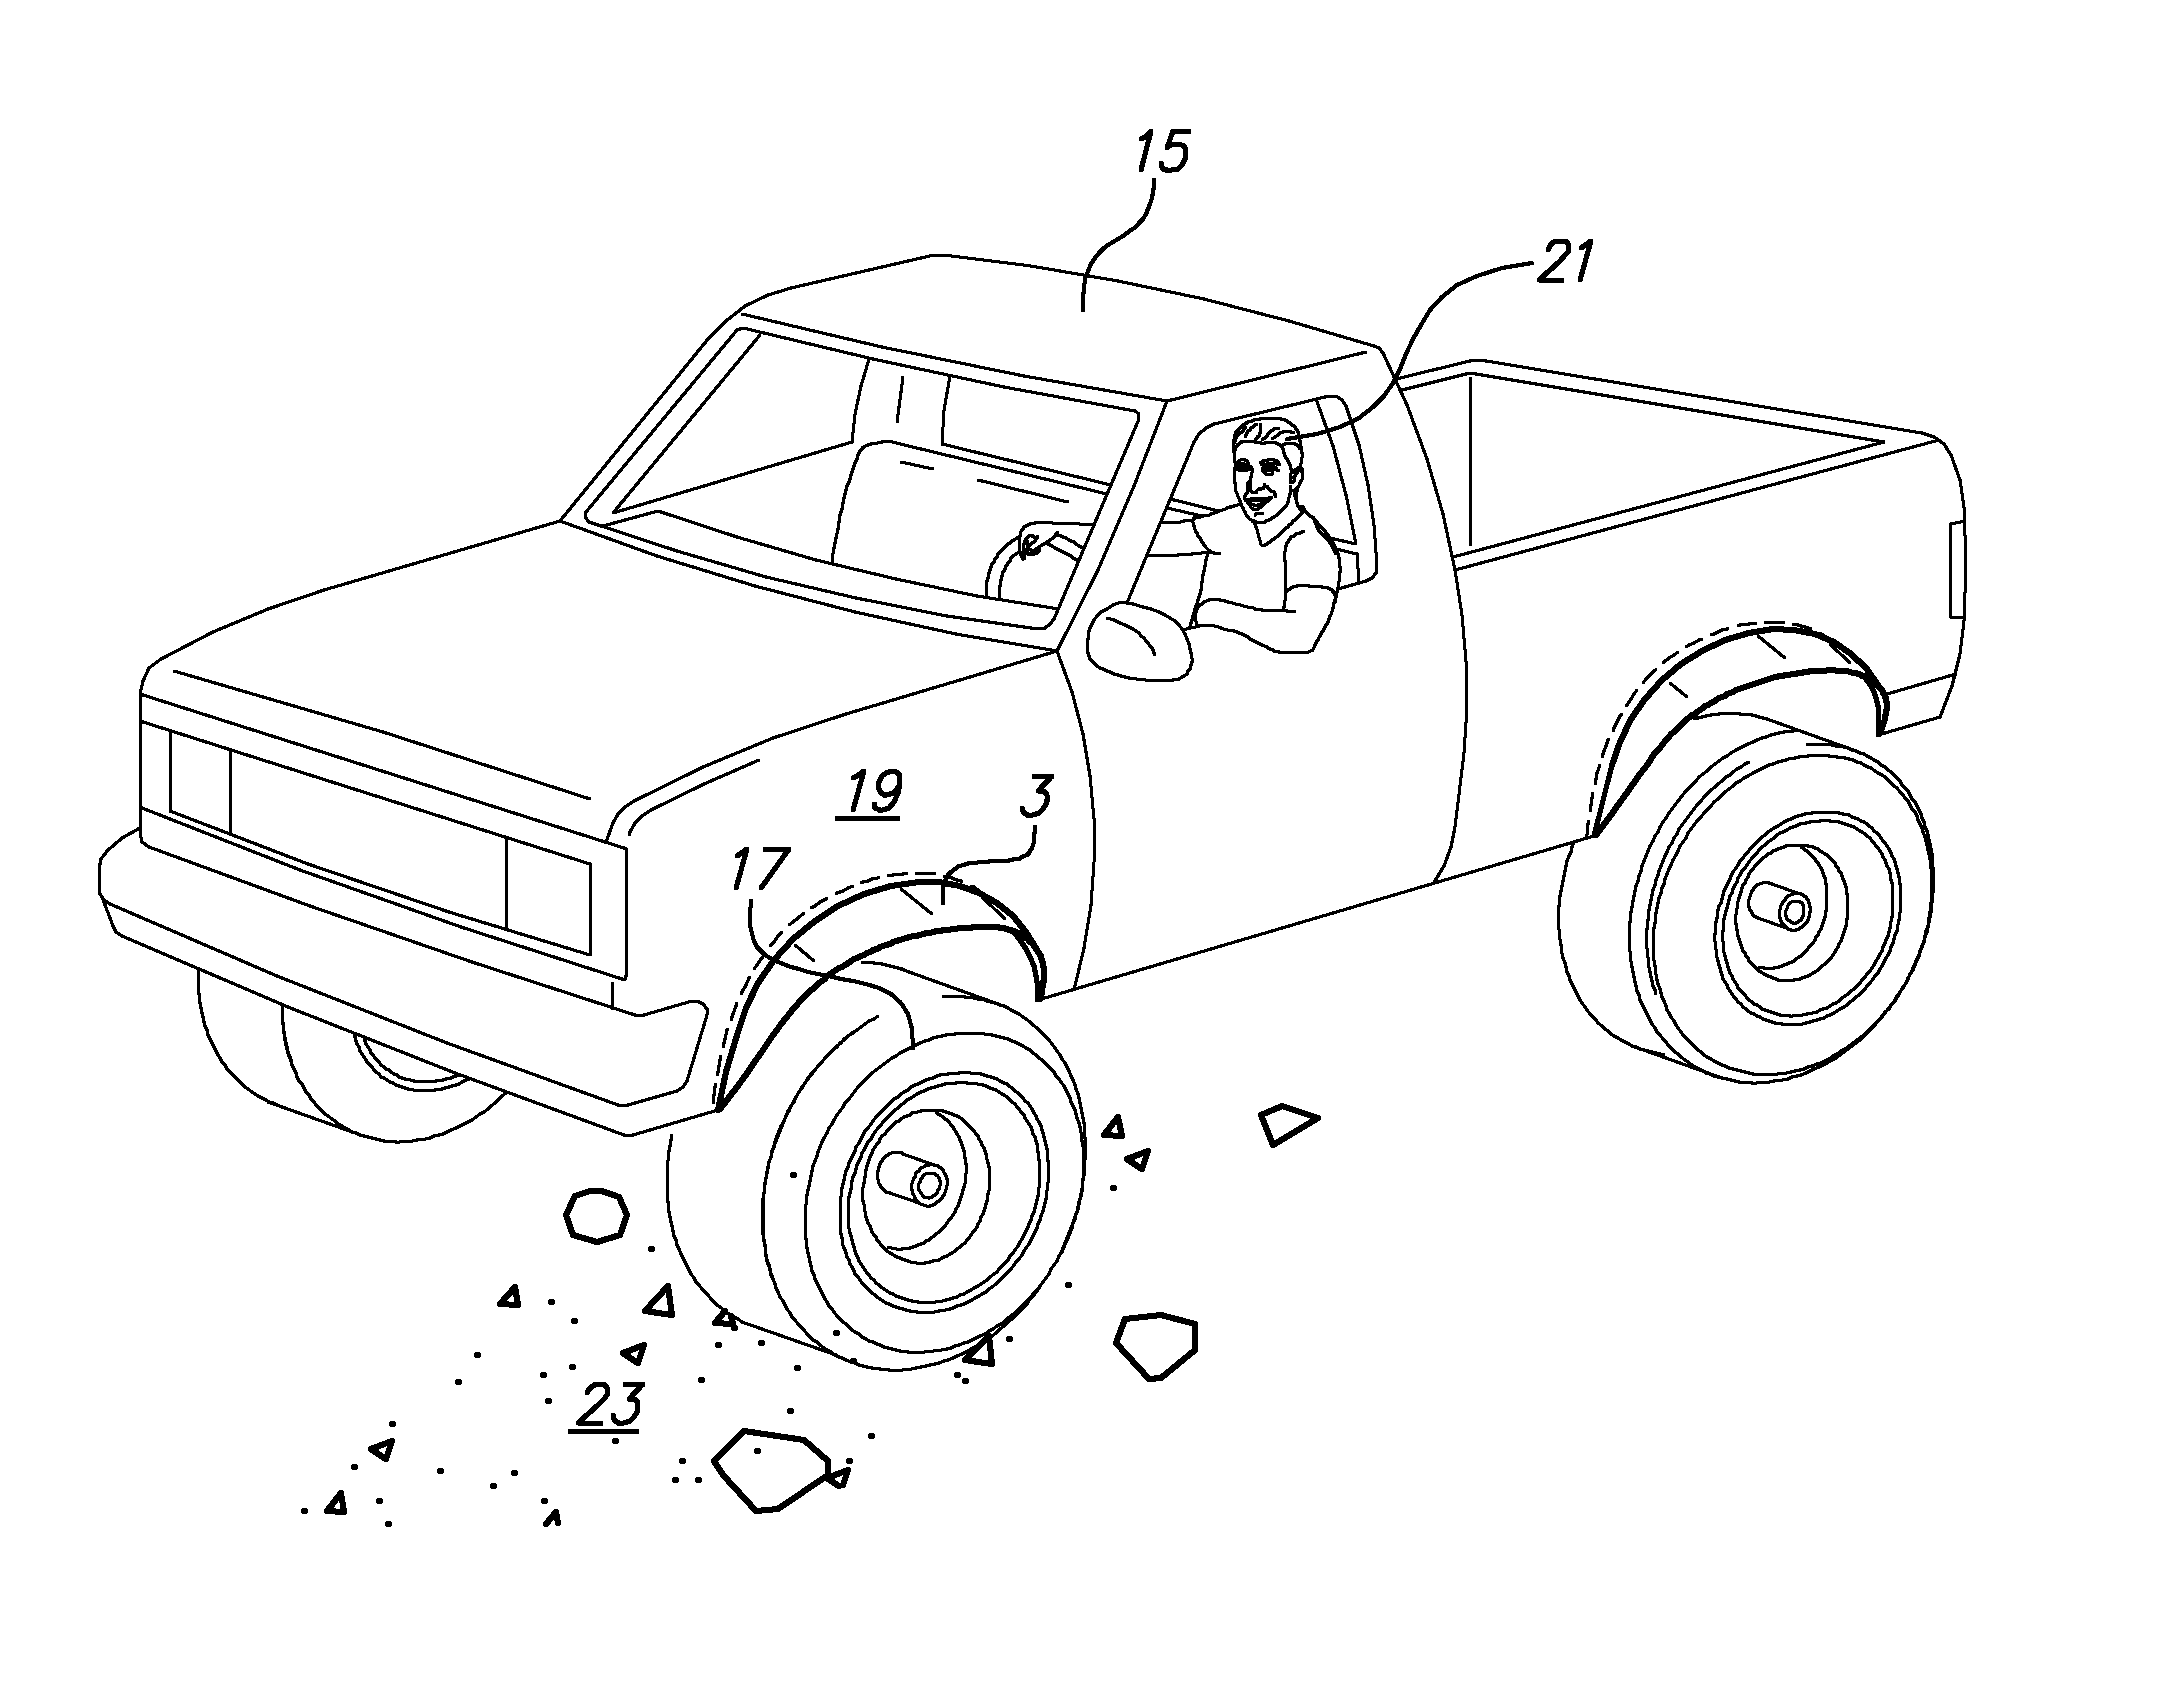 Retractable Tangential Debris Deflector for Vehicle Occupant Safety